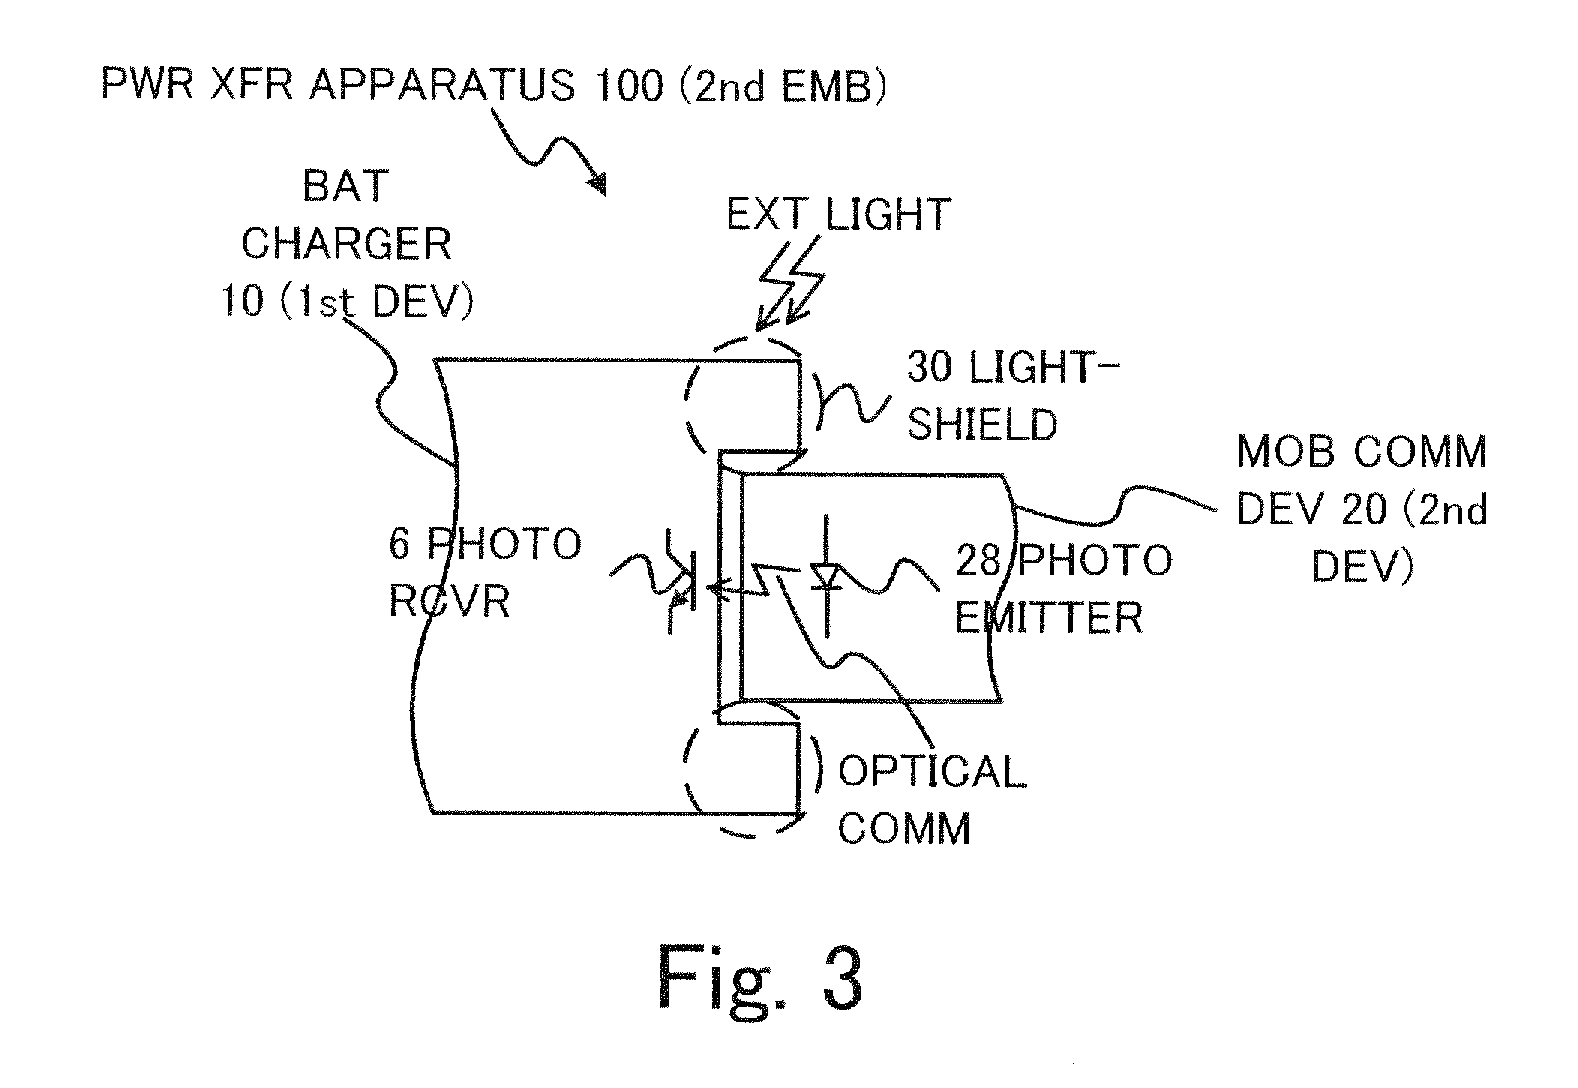 Power transfer apparatus and method for transferring electric power